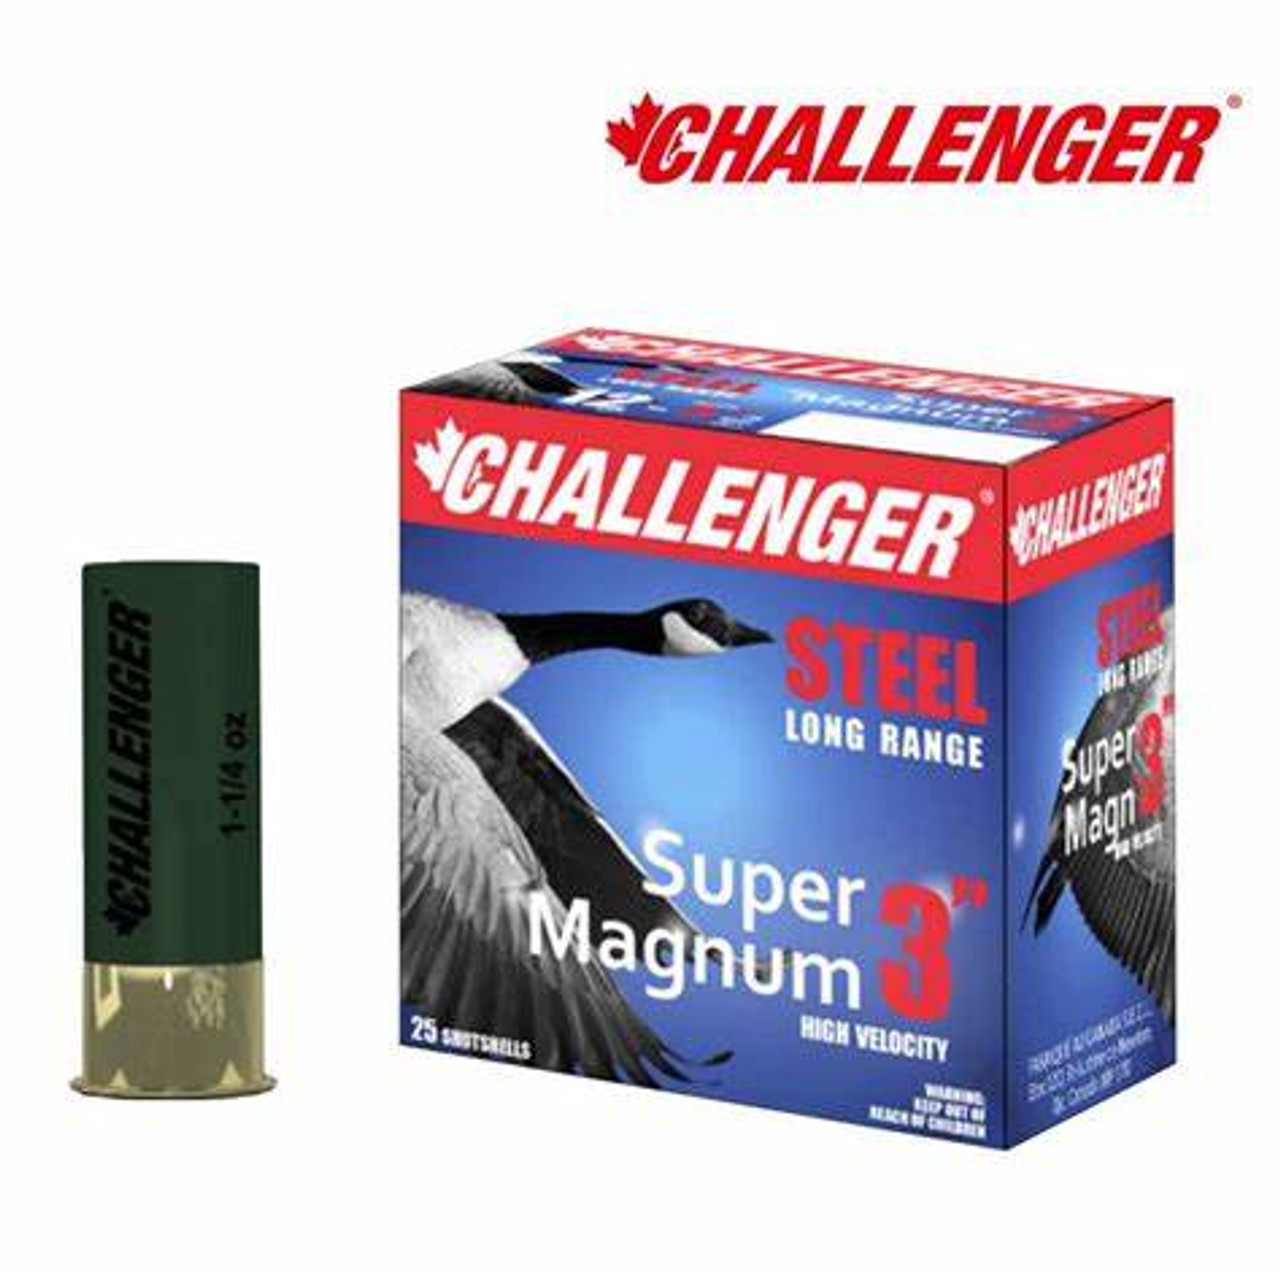 Challenger Super Magnum 12Ga 3″ #1 STEEL 1 1/4 oz 1450 FPS – 25Rds

Specifications

Velocity: 1450 f/s
Shot Size: #1
Shot Composition: Steel
Shell Length: 3
Bullet Weight: 1-1/4 oz
Quantity: 25 Rounds